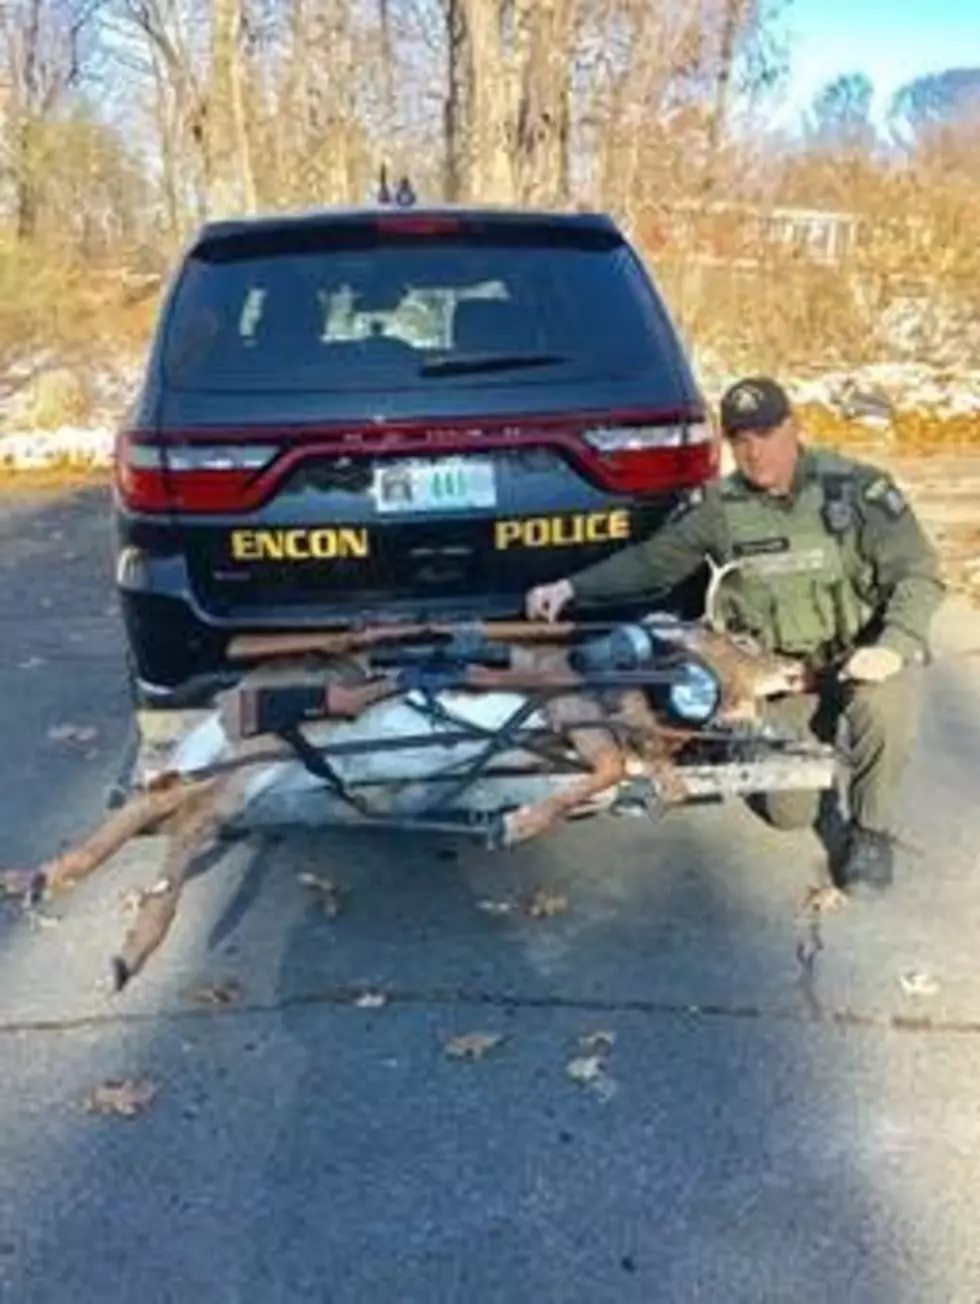 Not So Dead Deer Gets New York Hunters Busted